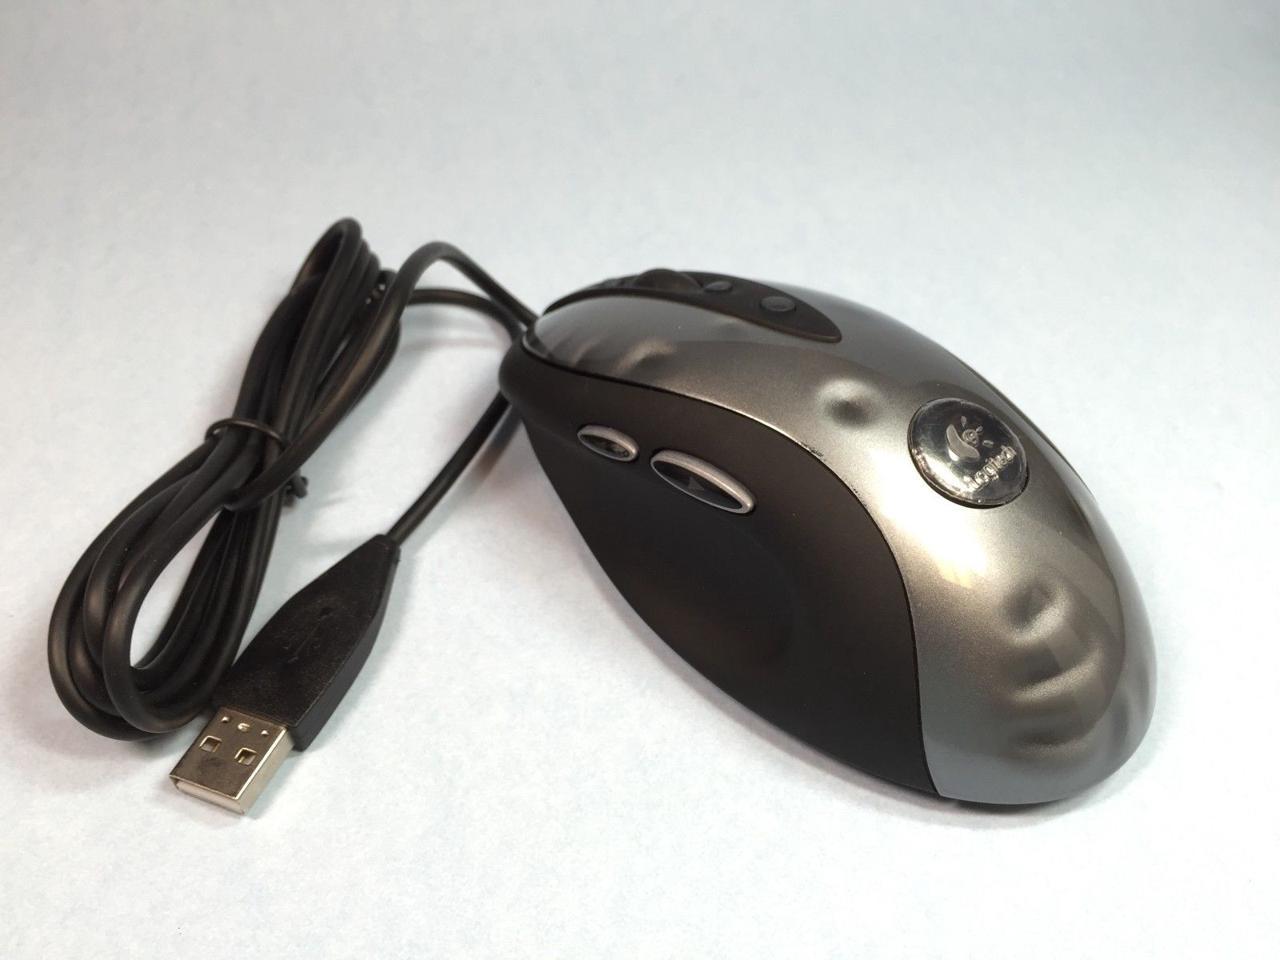 Logitech MX518 Gaming Mouse 1800 dpi USB Wired Optical Mouse MX